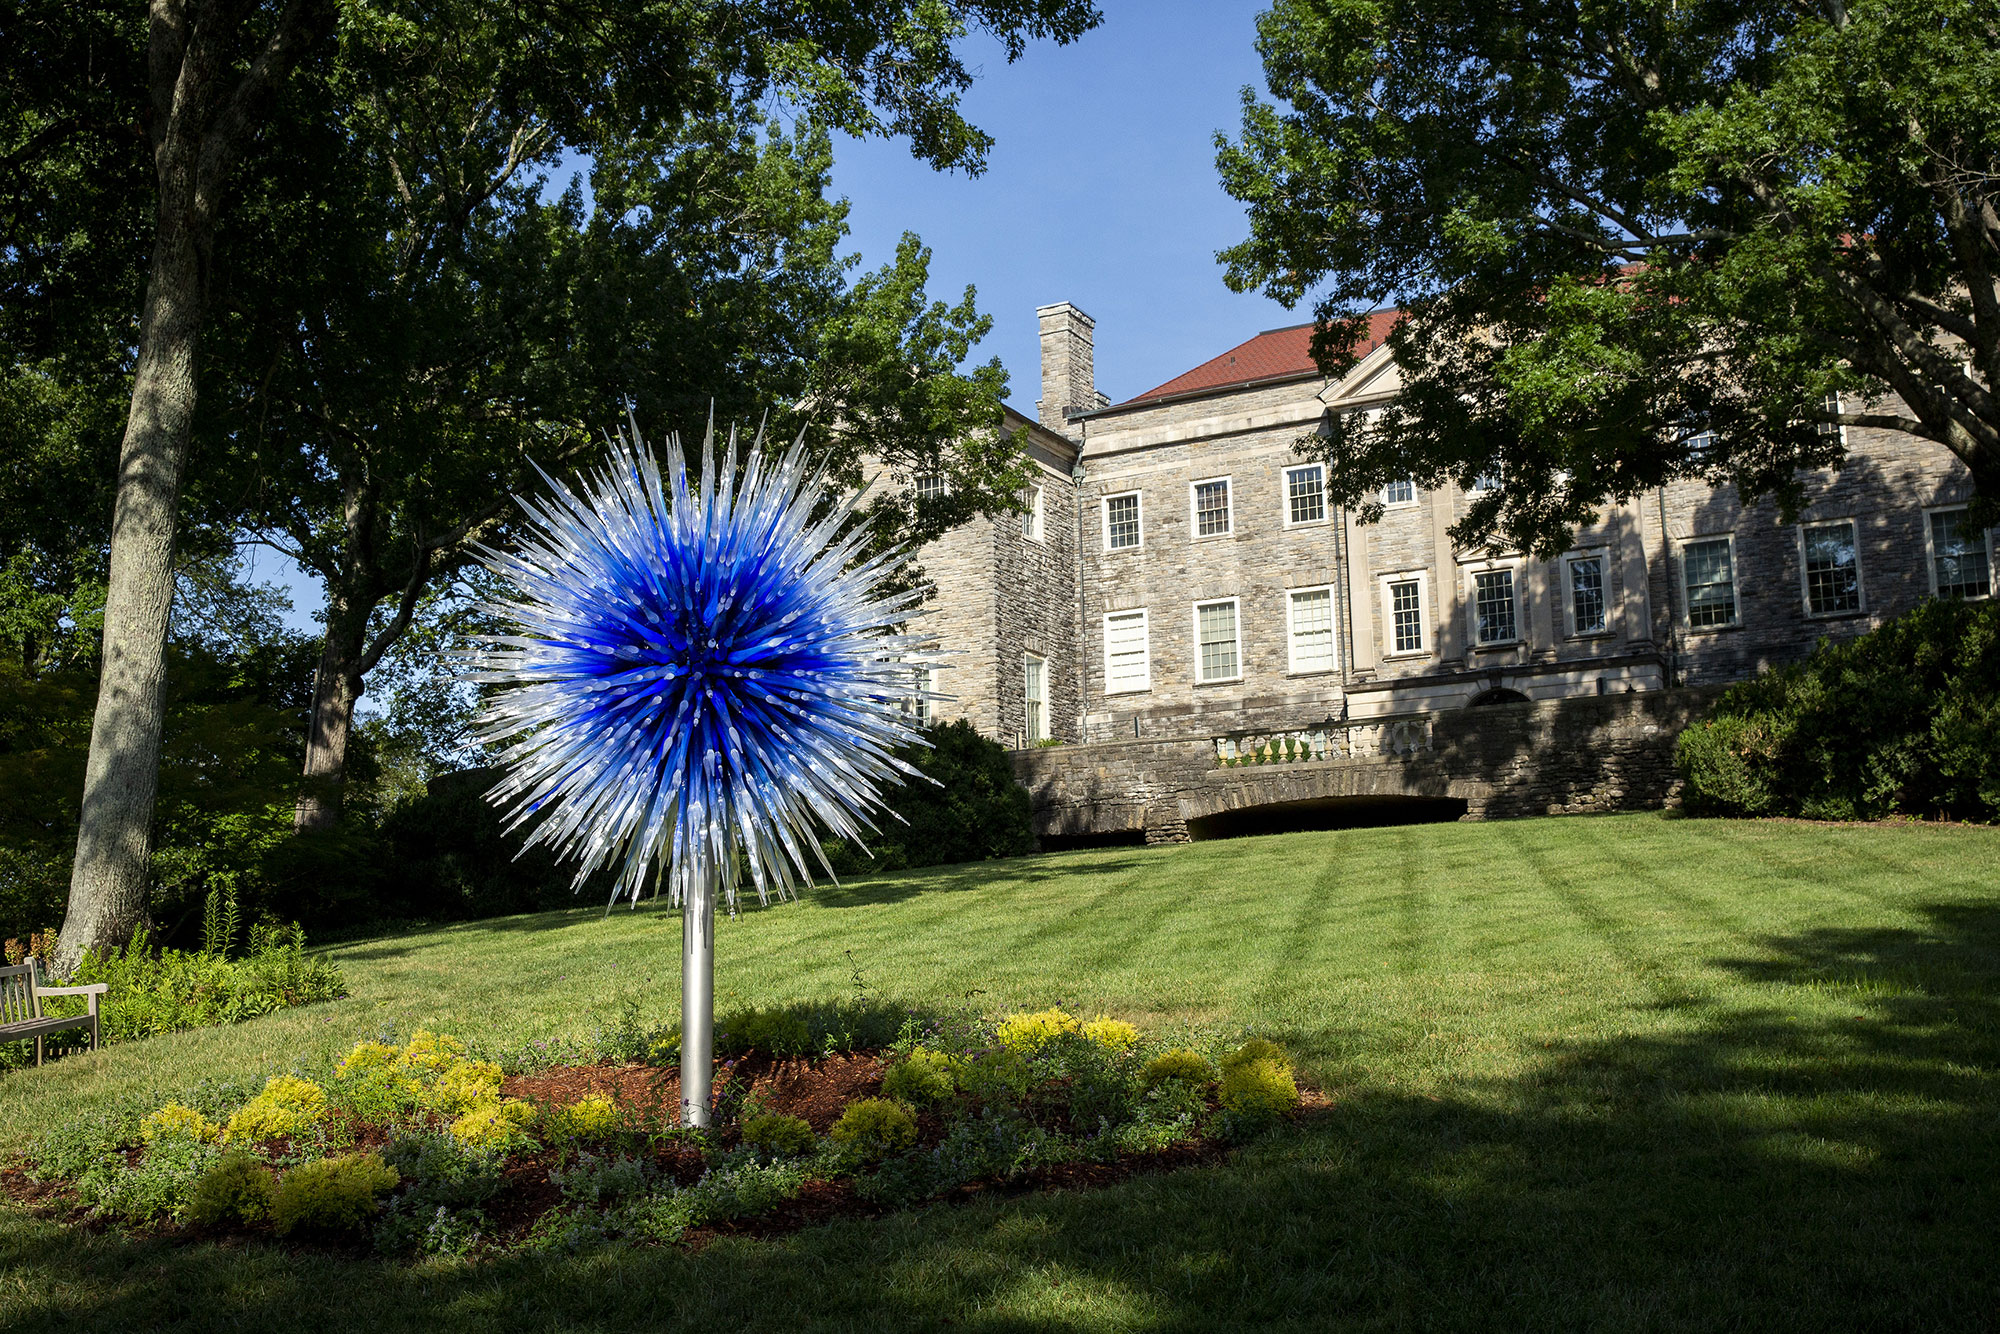 Sapphire Star (2010) by Dale Chihuly